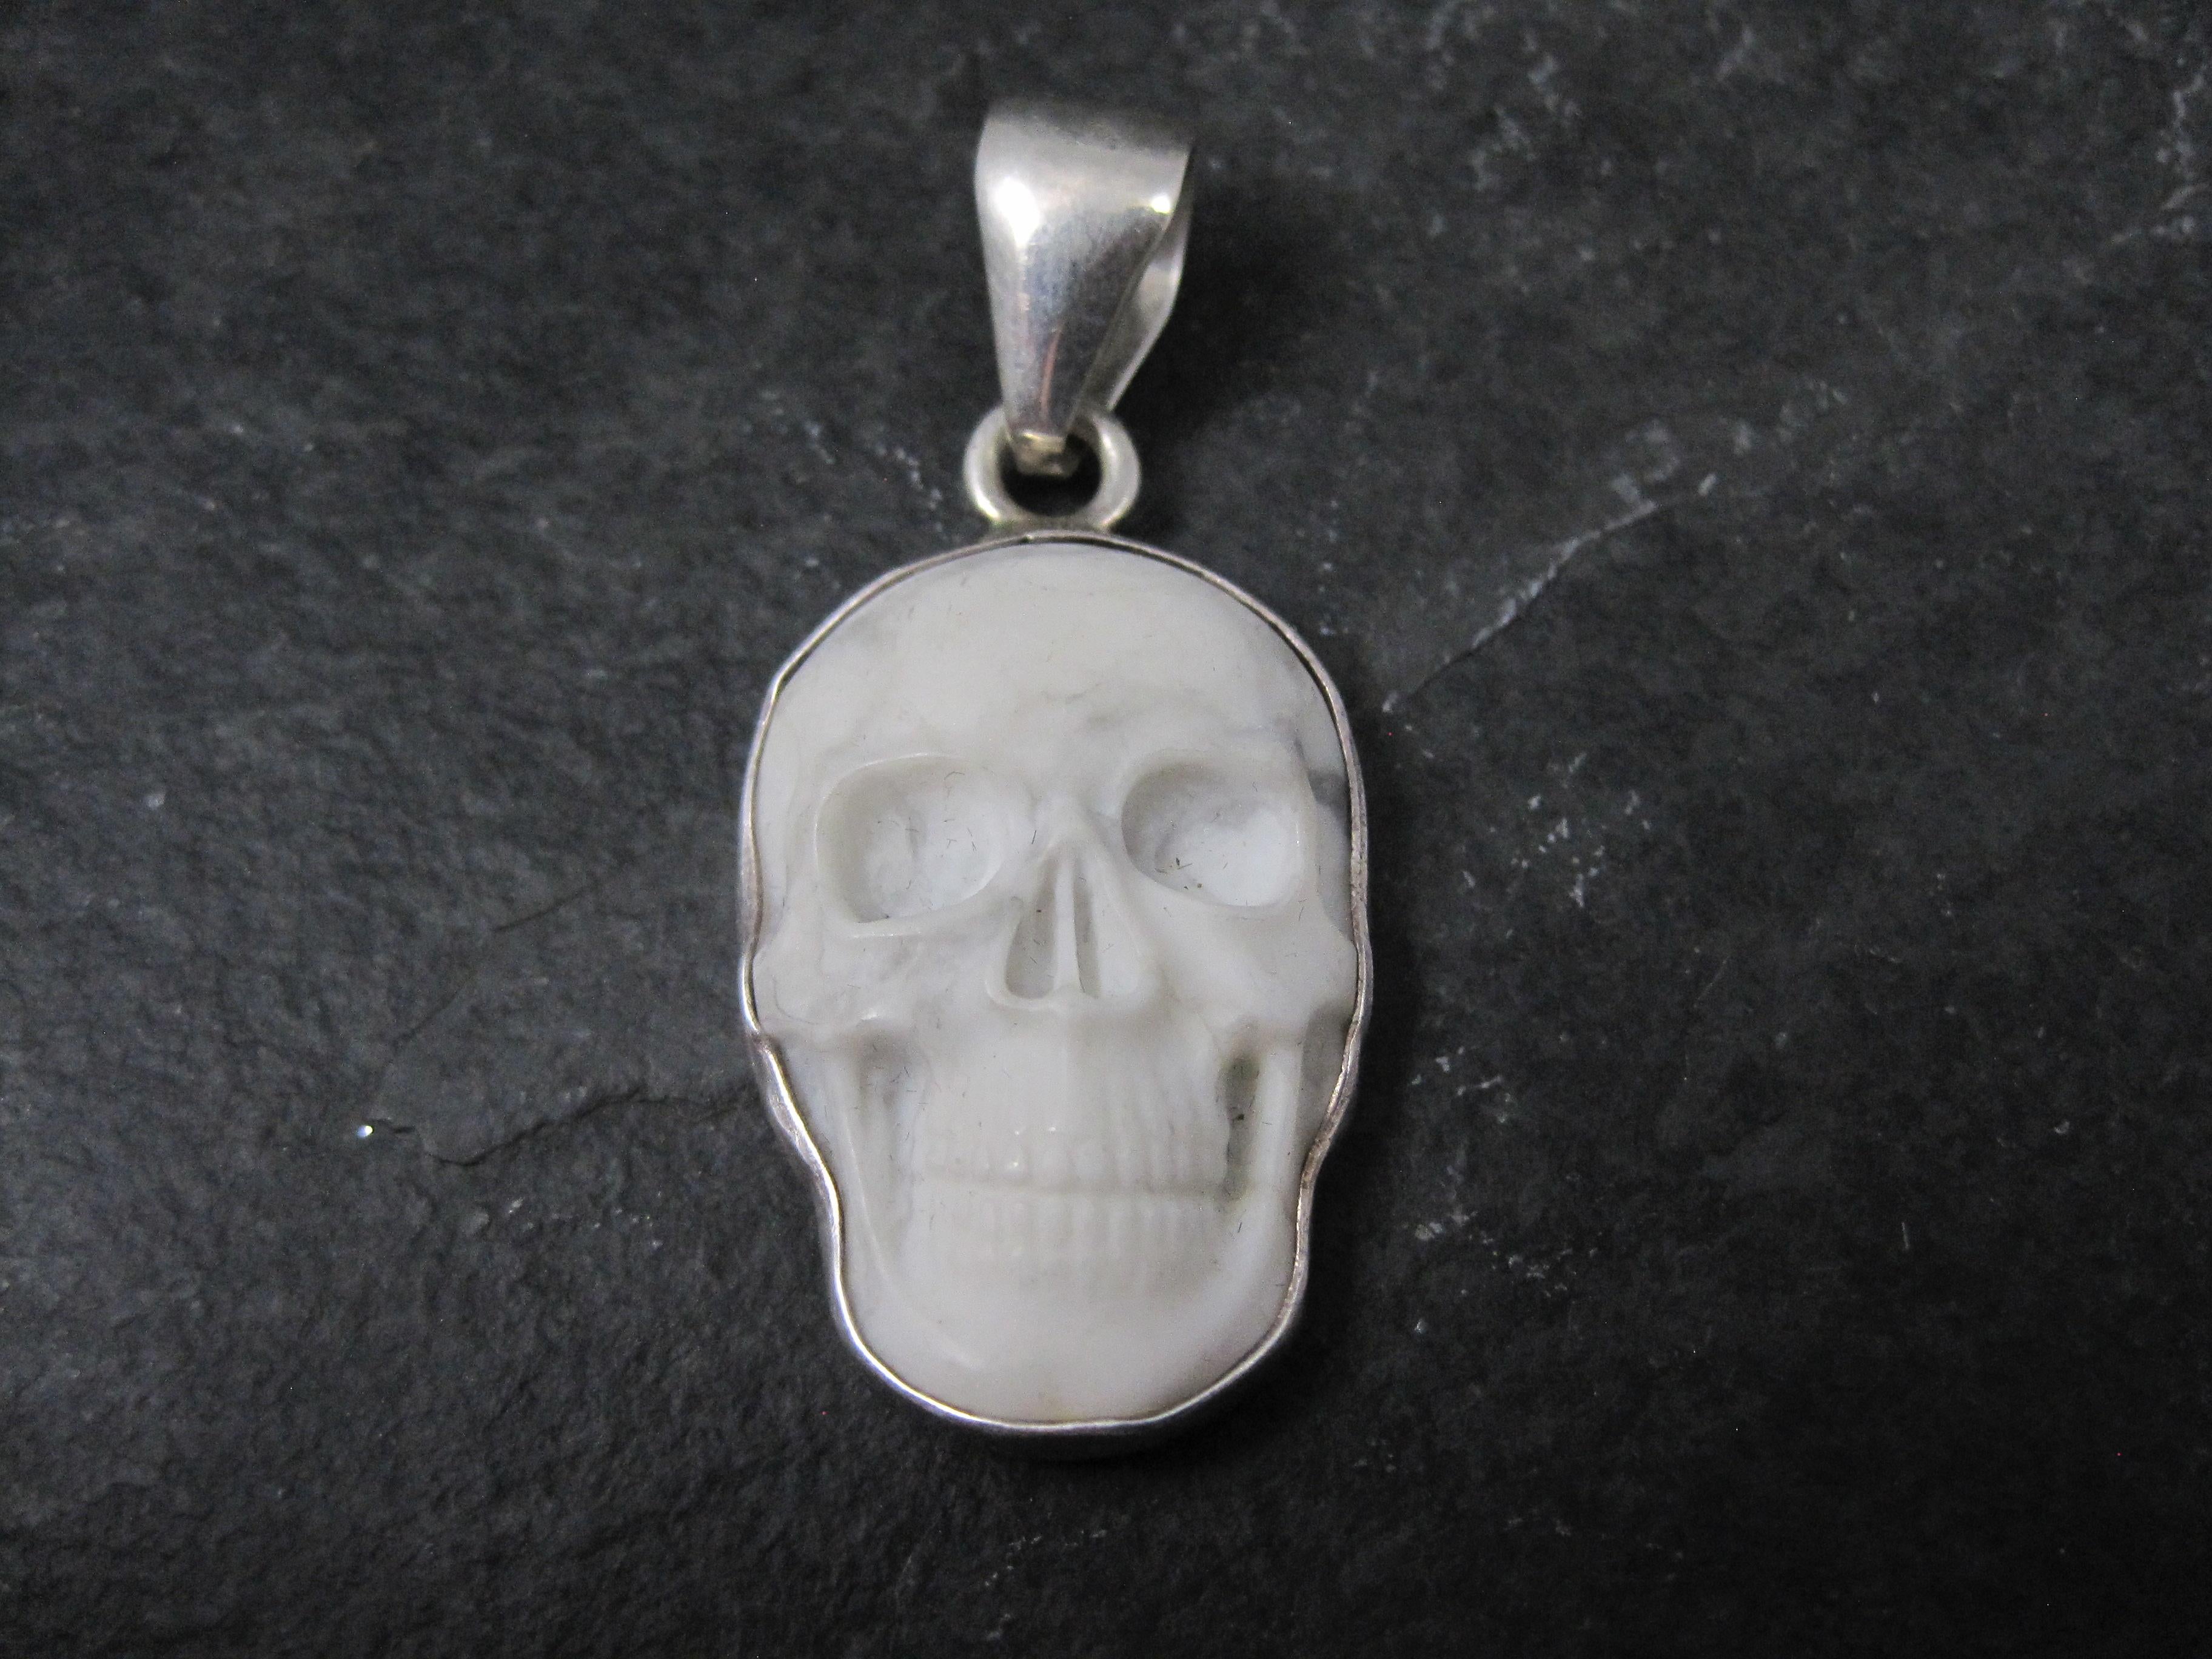 This gorgeous sterling silver pendant is a creation of Charles Albert.
It features a hand-carved howlite skull.

Measurements: 13/16 by 1 7/8 inches, including the bail
The bail will accommodate a chain up to 6mm wide.

Condition: Excellent
